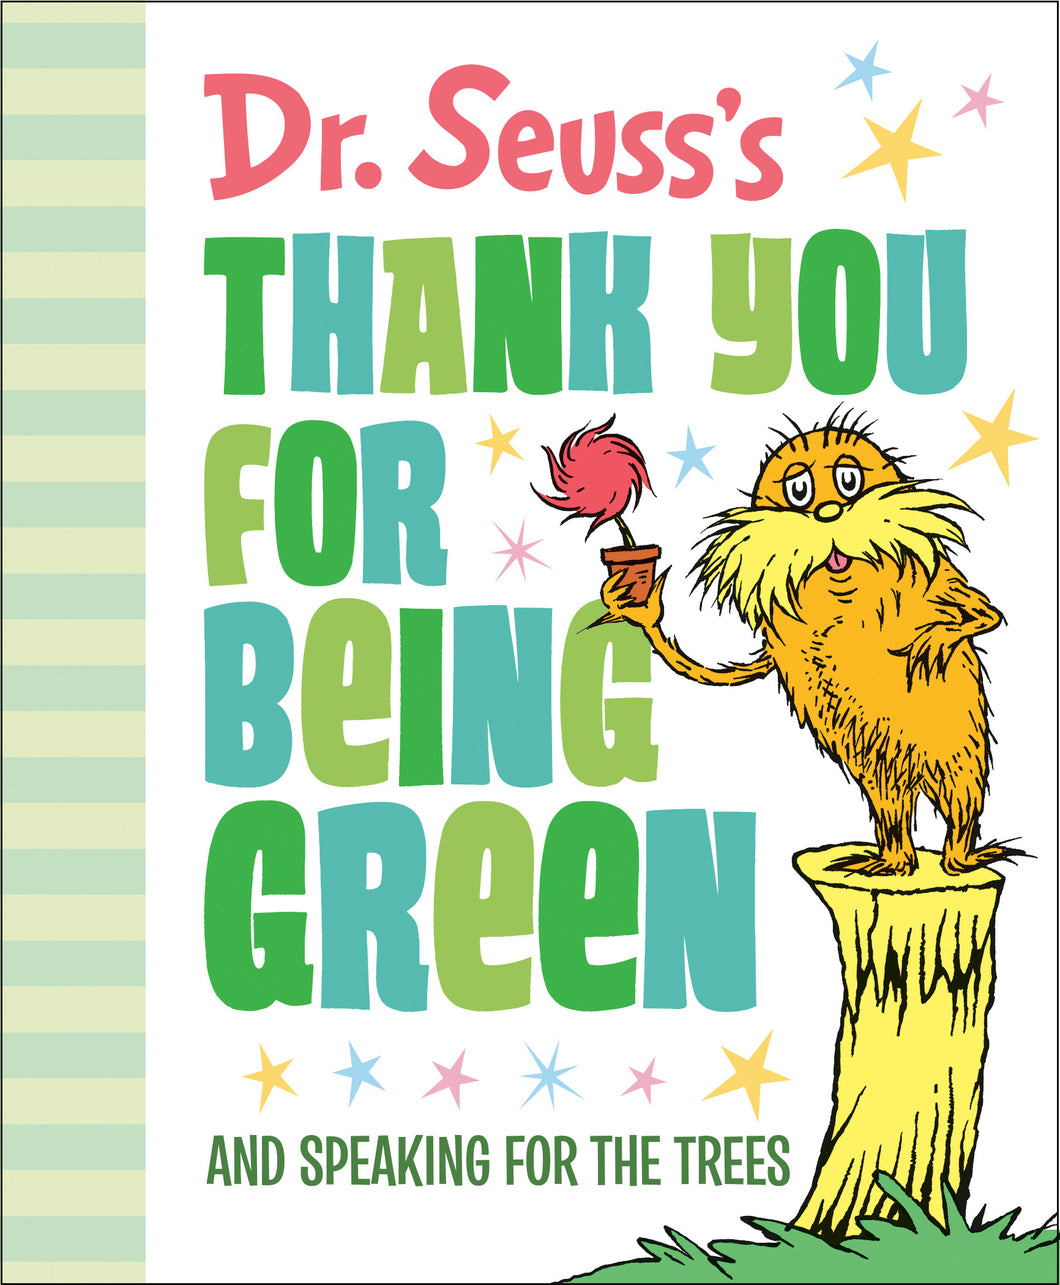 Dr. Seuss's Thank You for Being Green: And Speaking for the Trees